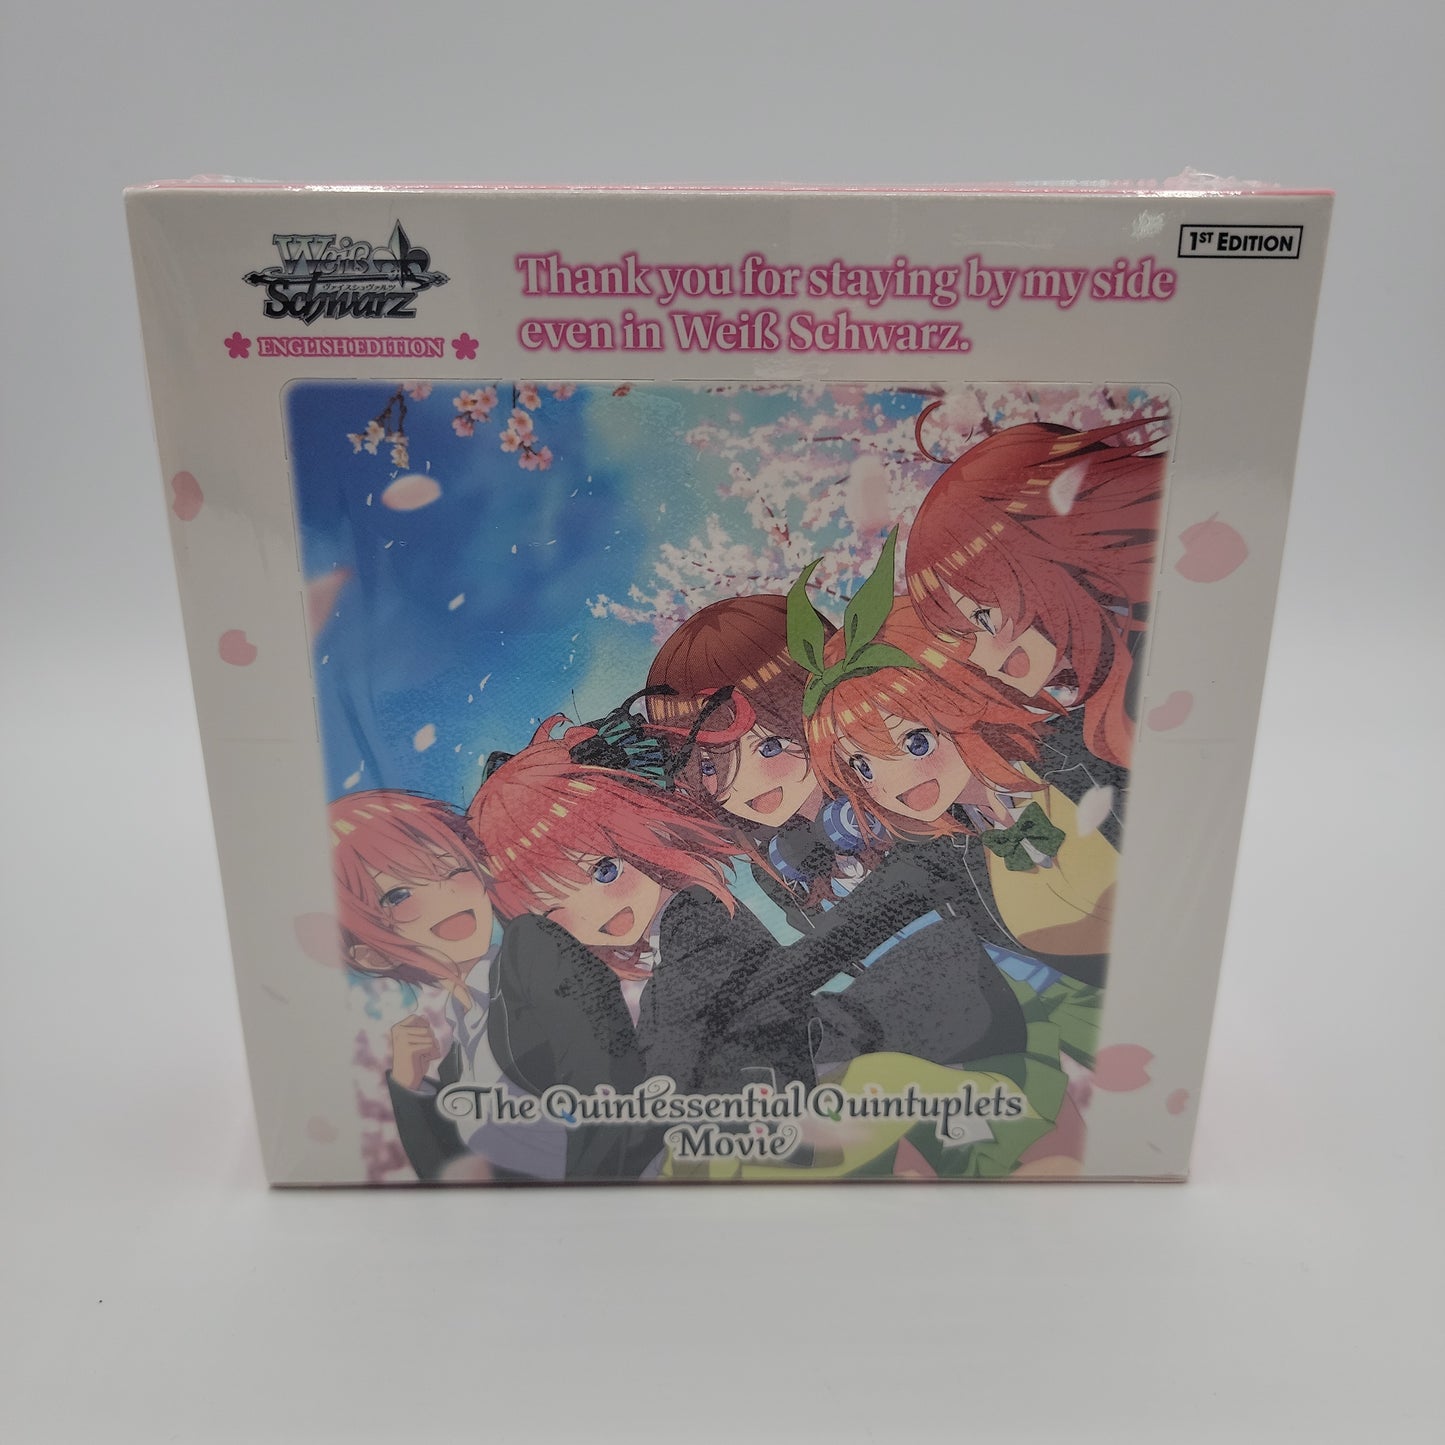 Weiss Schwarz - The Quintessential Quintuplets Movie - 1st Edition - Booster Box